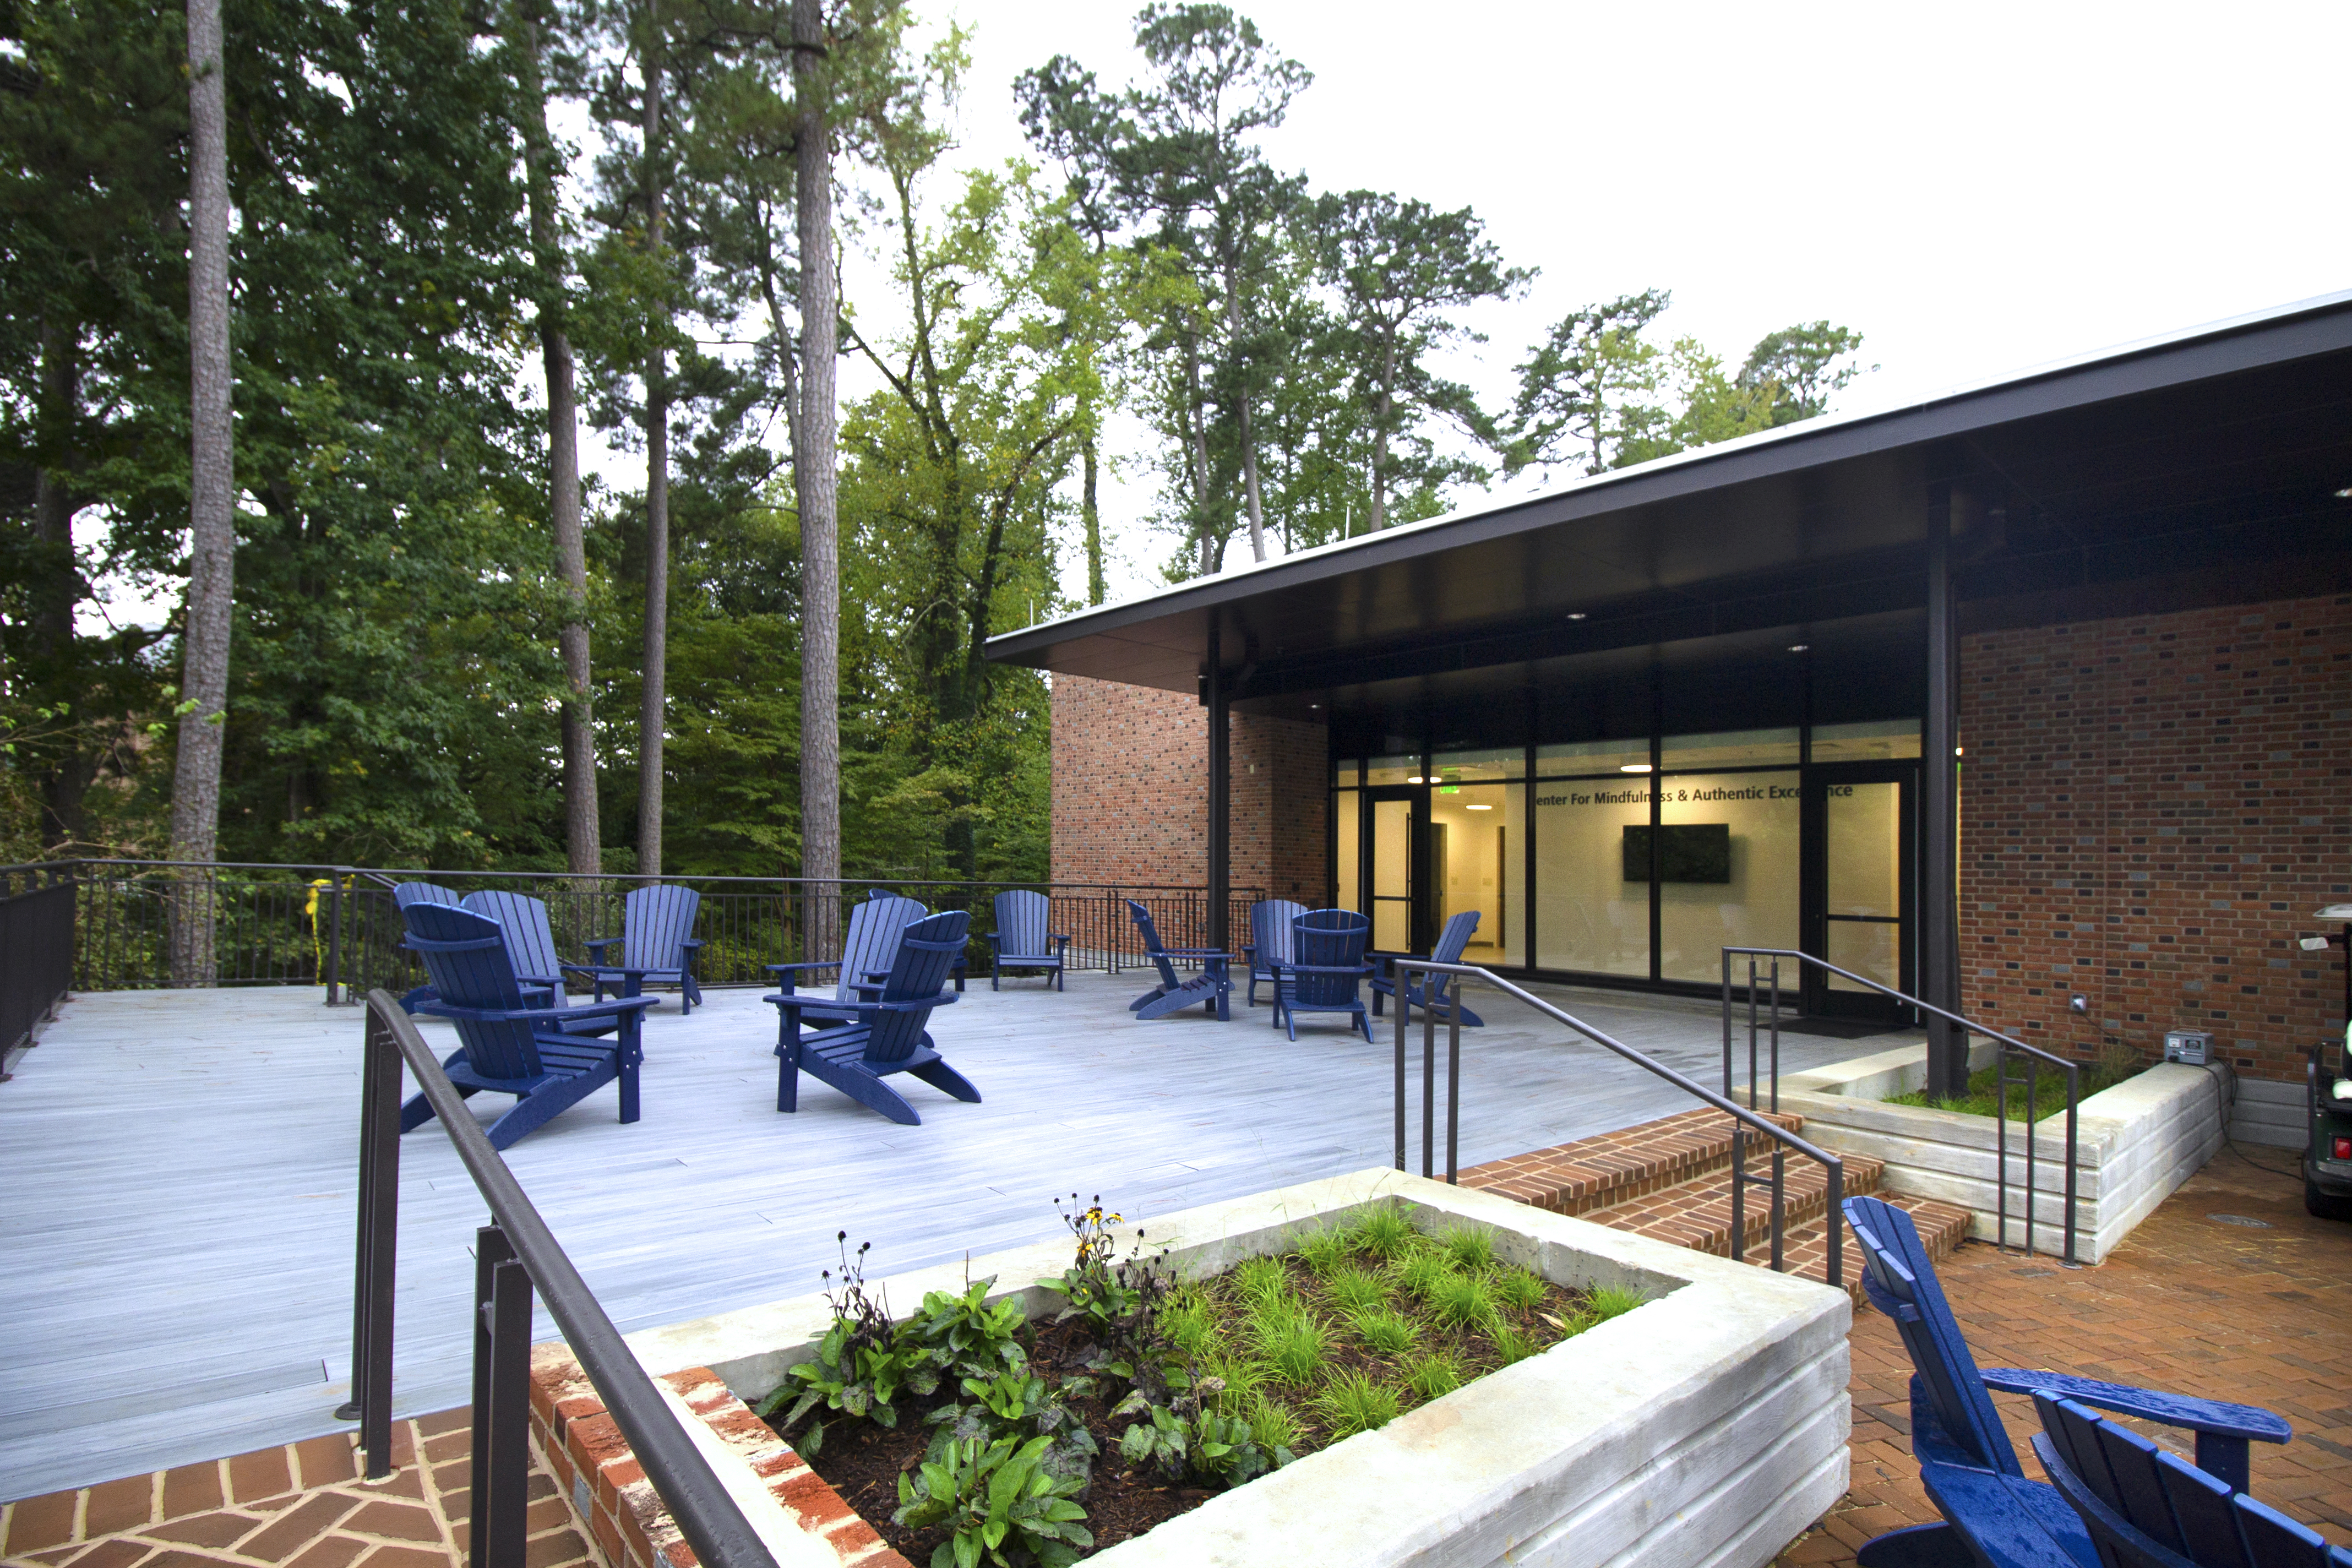 McLeod Tyler Wellness Center’s Outdoor patio set up with multiple outdoor seating arrangements, views of surrounding natural landscape, and outdoor lighting design by Henry Adams MEP engineering firm that promotes light pollution reduction 